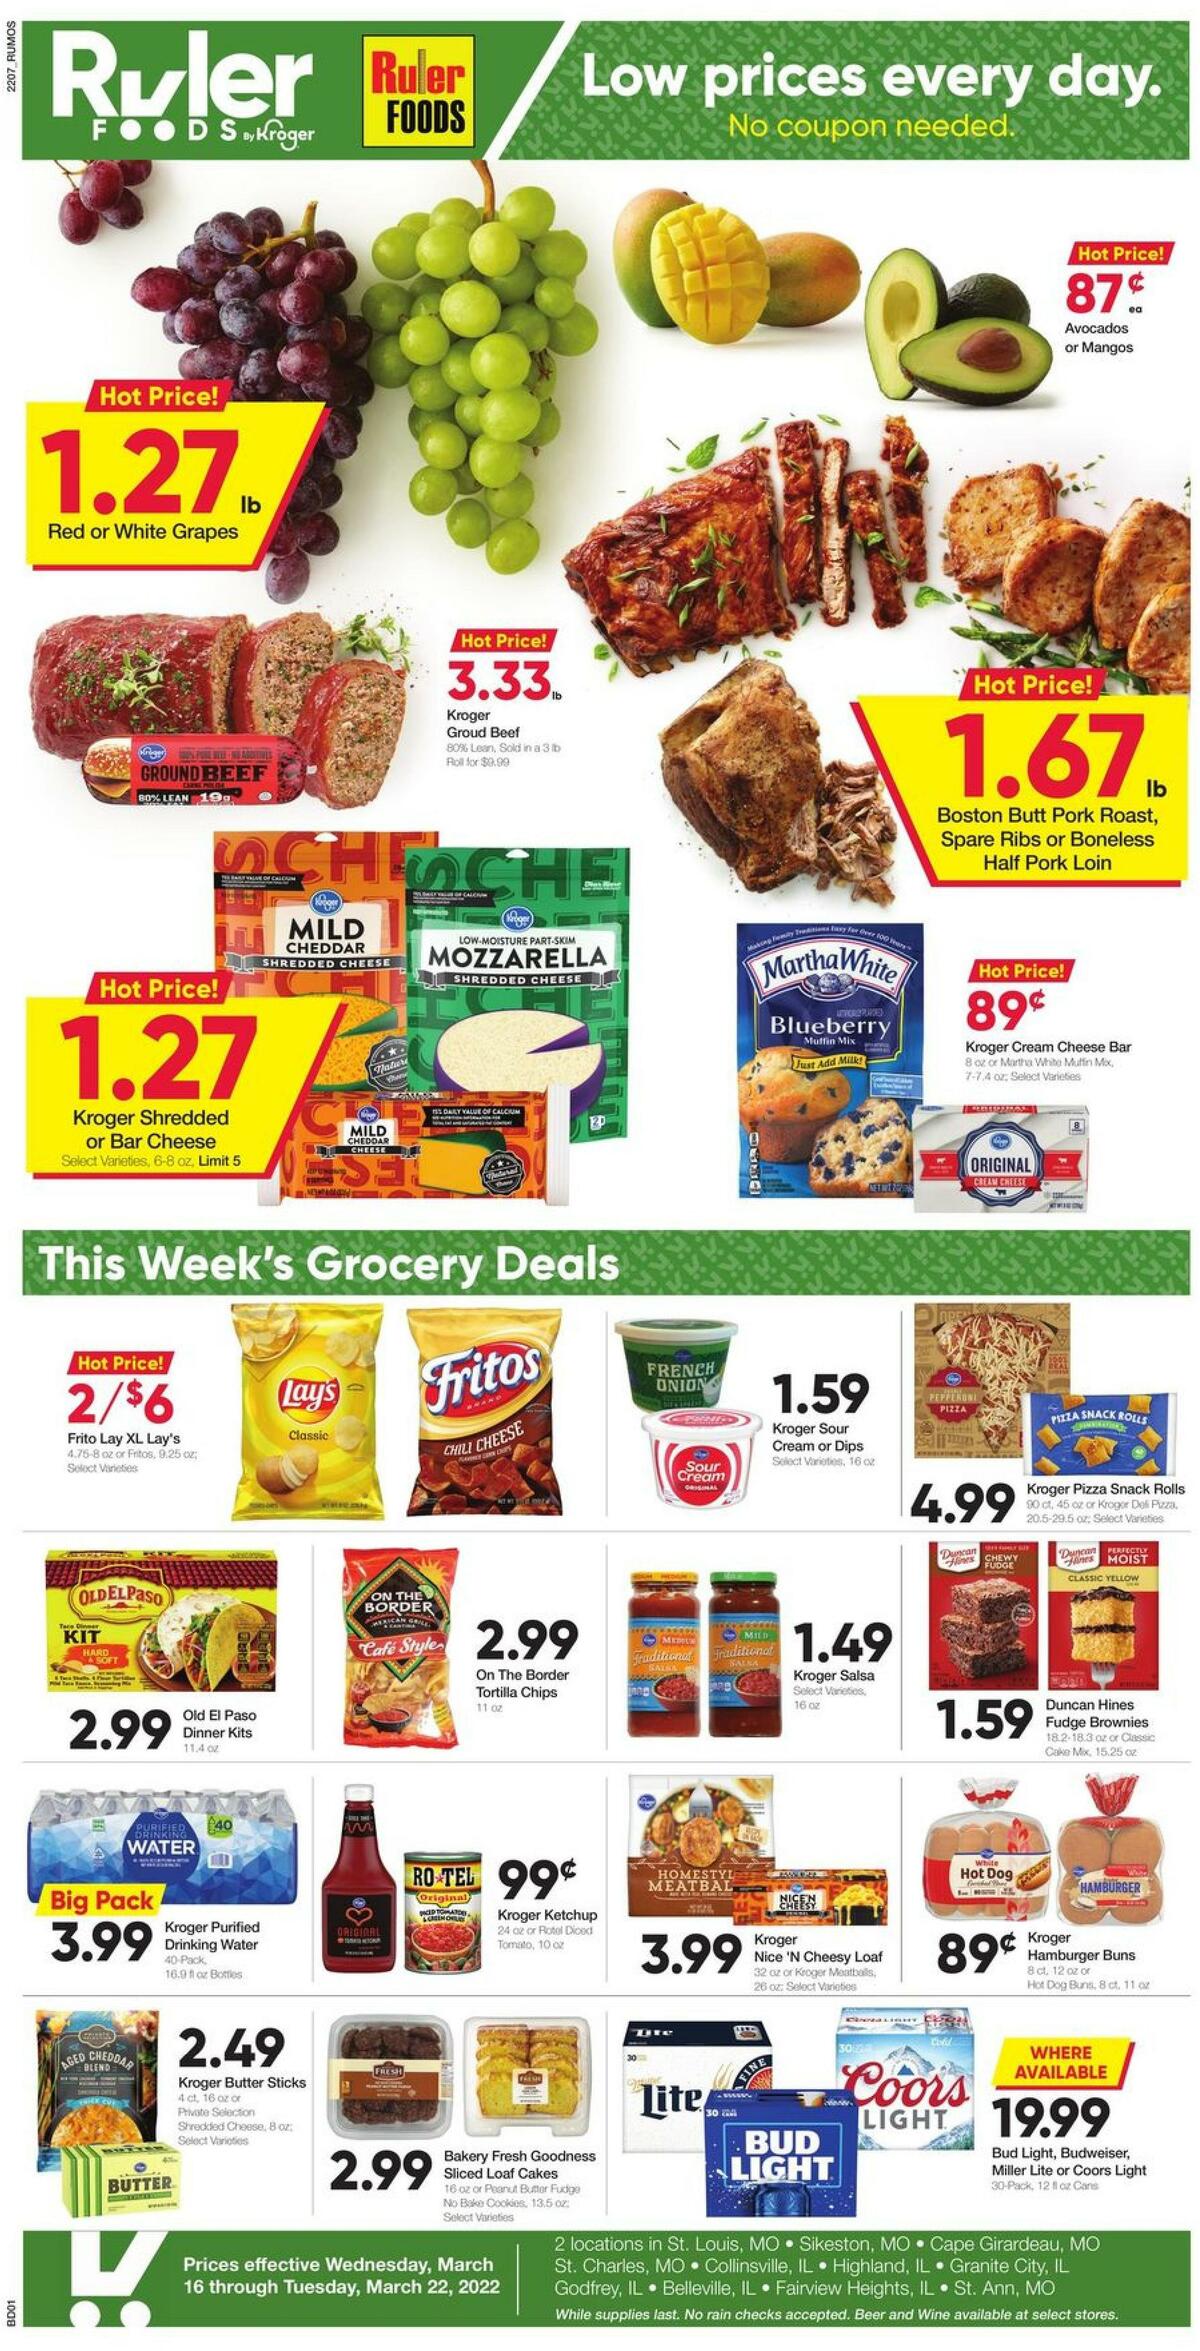 Ruler Foods Weekly Ad from March 16